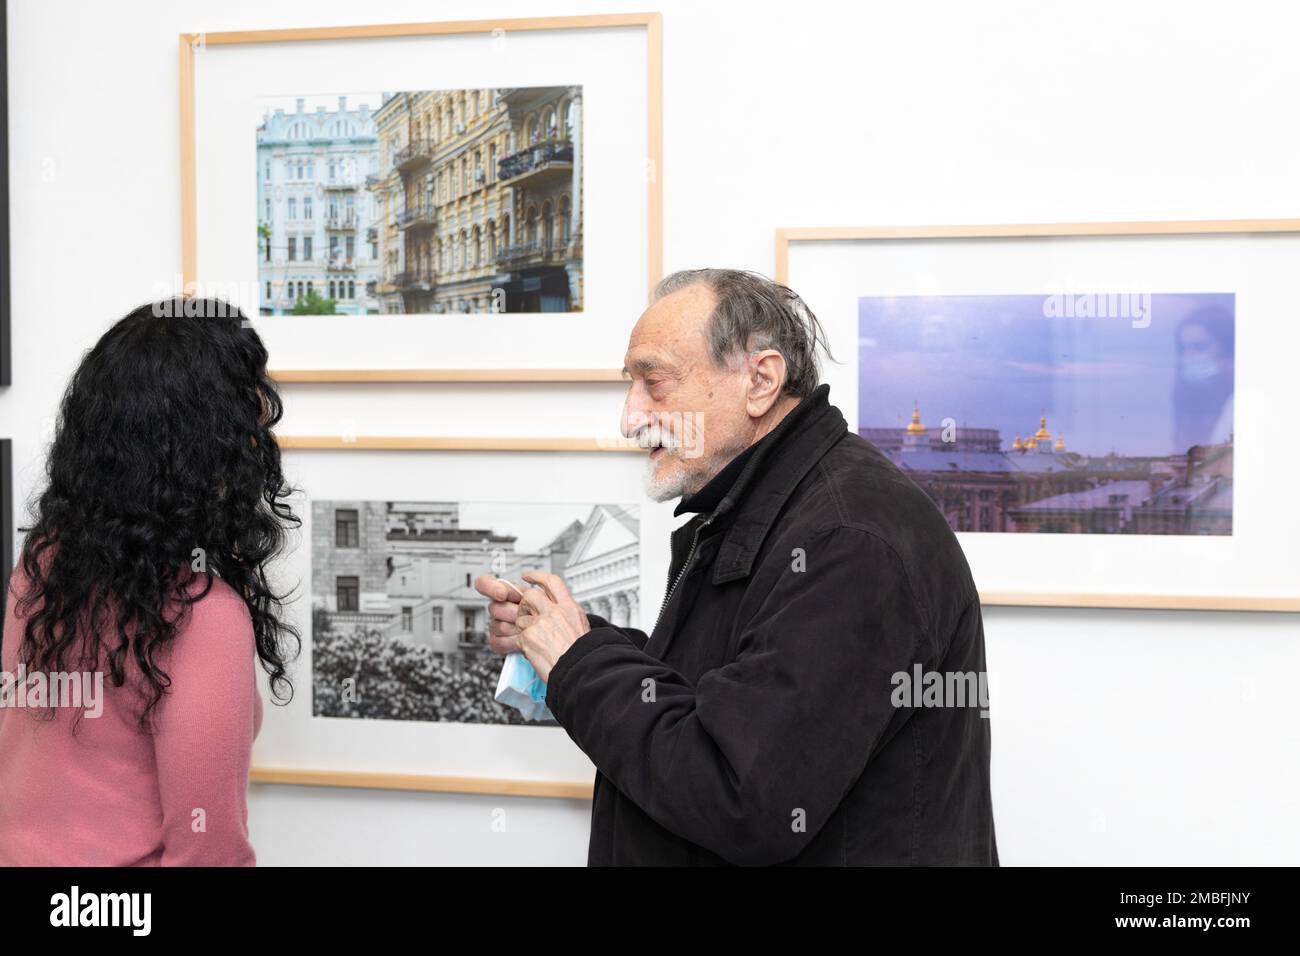 Photo exhibition Kyiv Emerging in Kommunale Galerie Berlin, Germany. Ukrainian photographer Boris Mikhailov speaking with one of the participants. Stock Photo